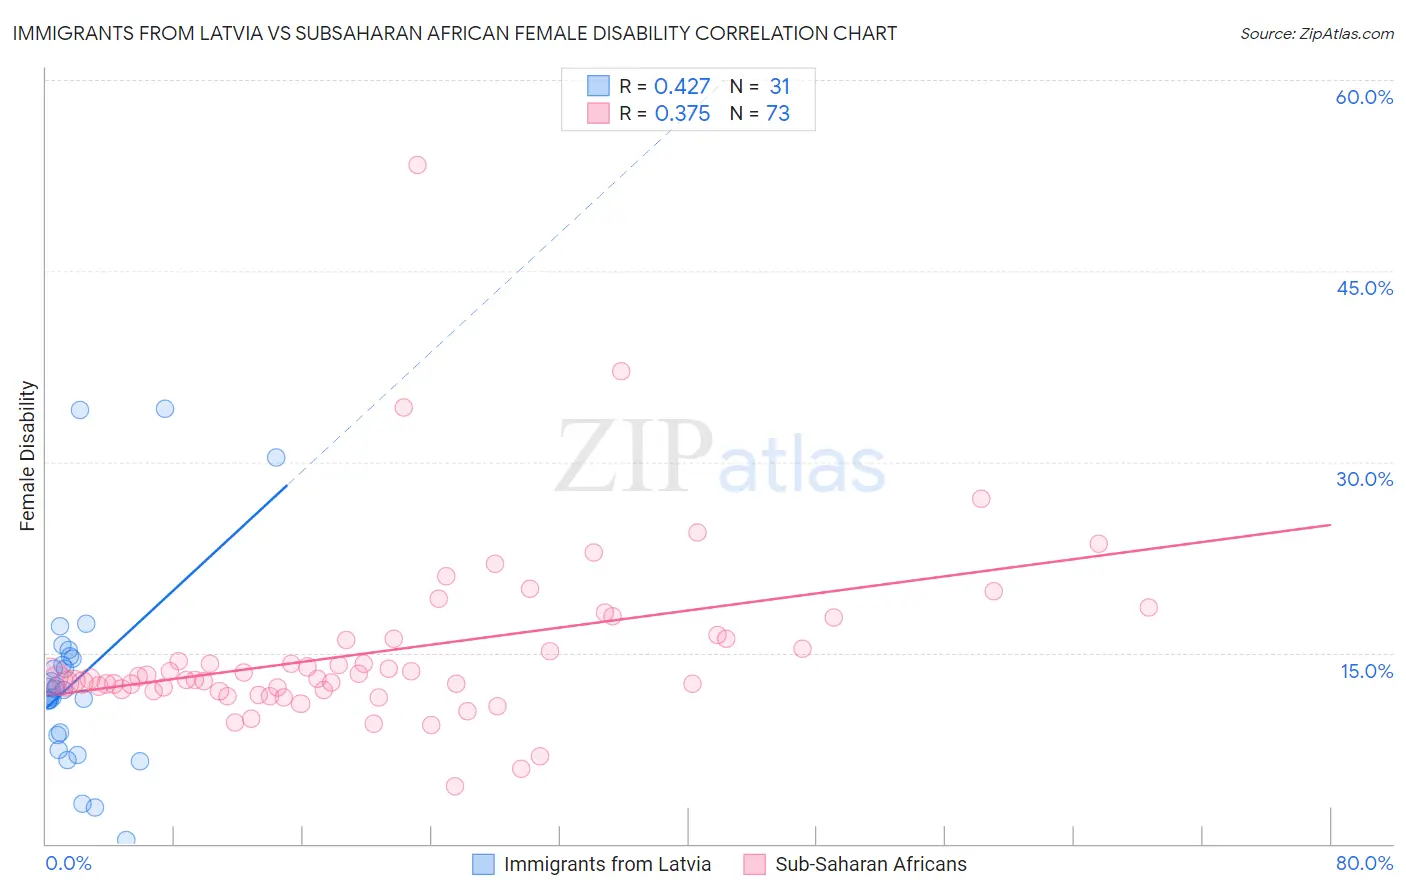 Immigrants from Latvia vs Subsaharan African Female Disability